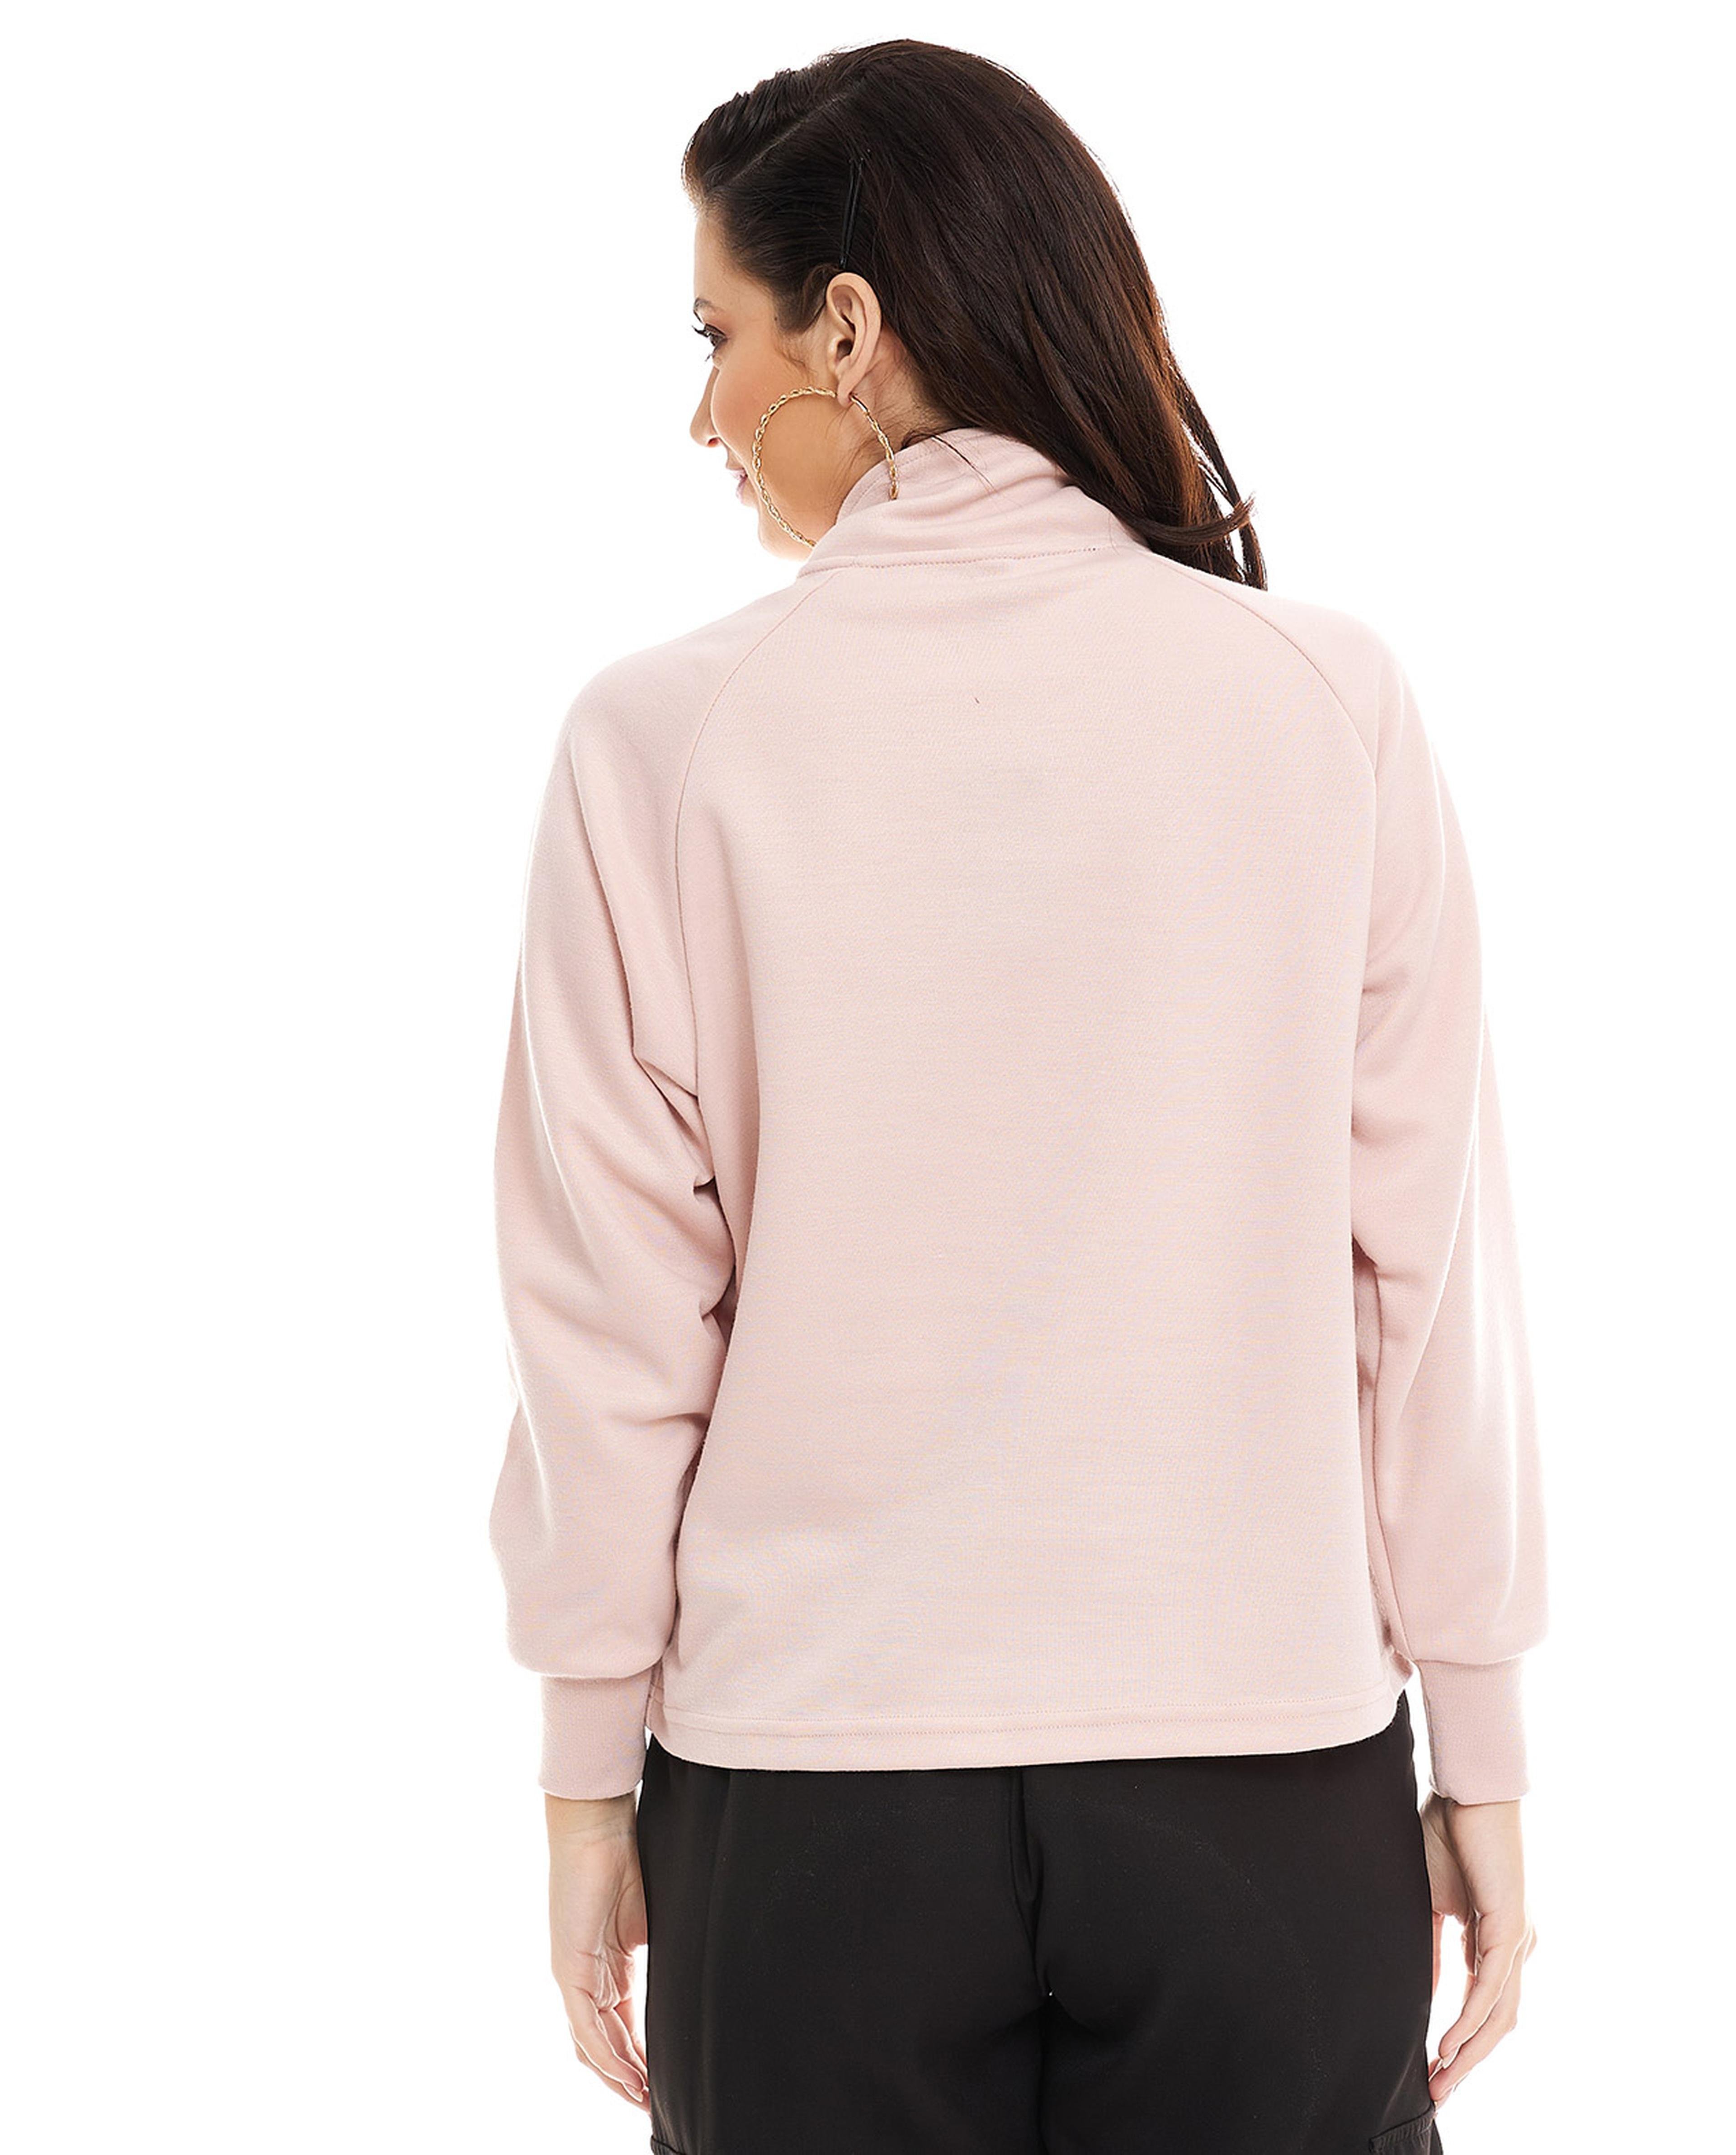 Solid Top with High Neck and Raglan Sleeves